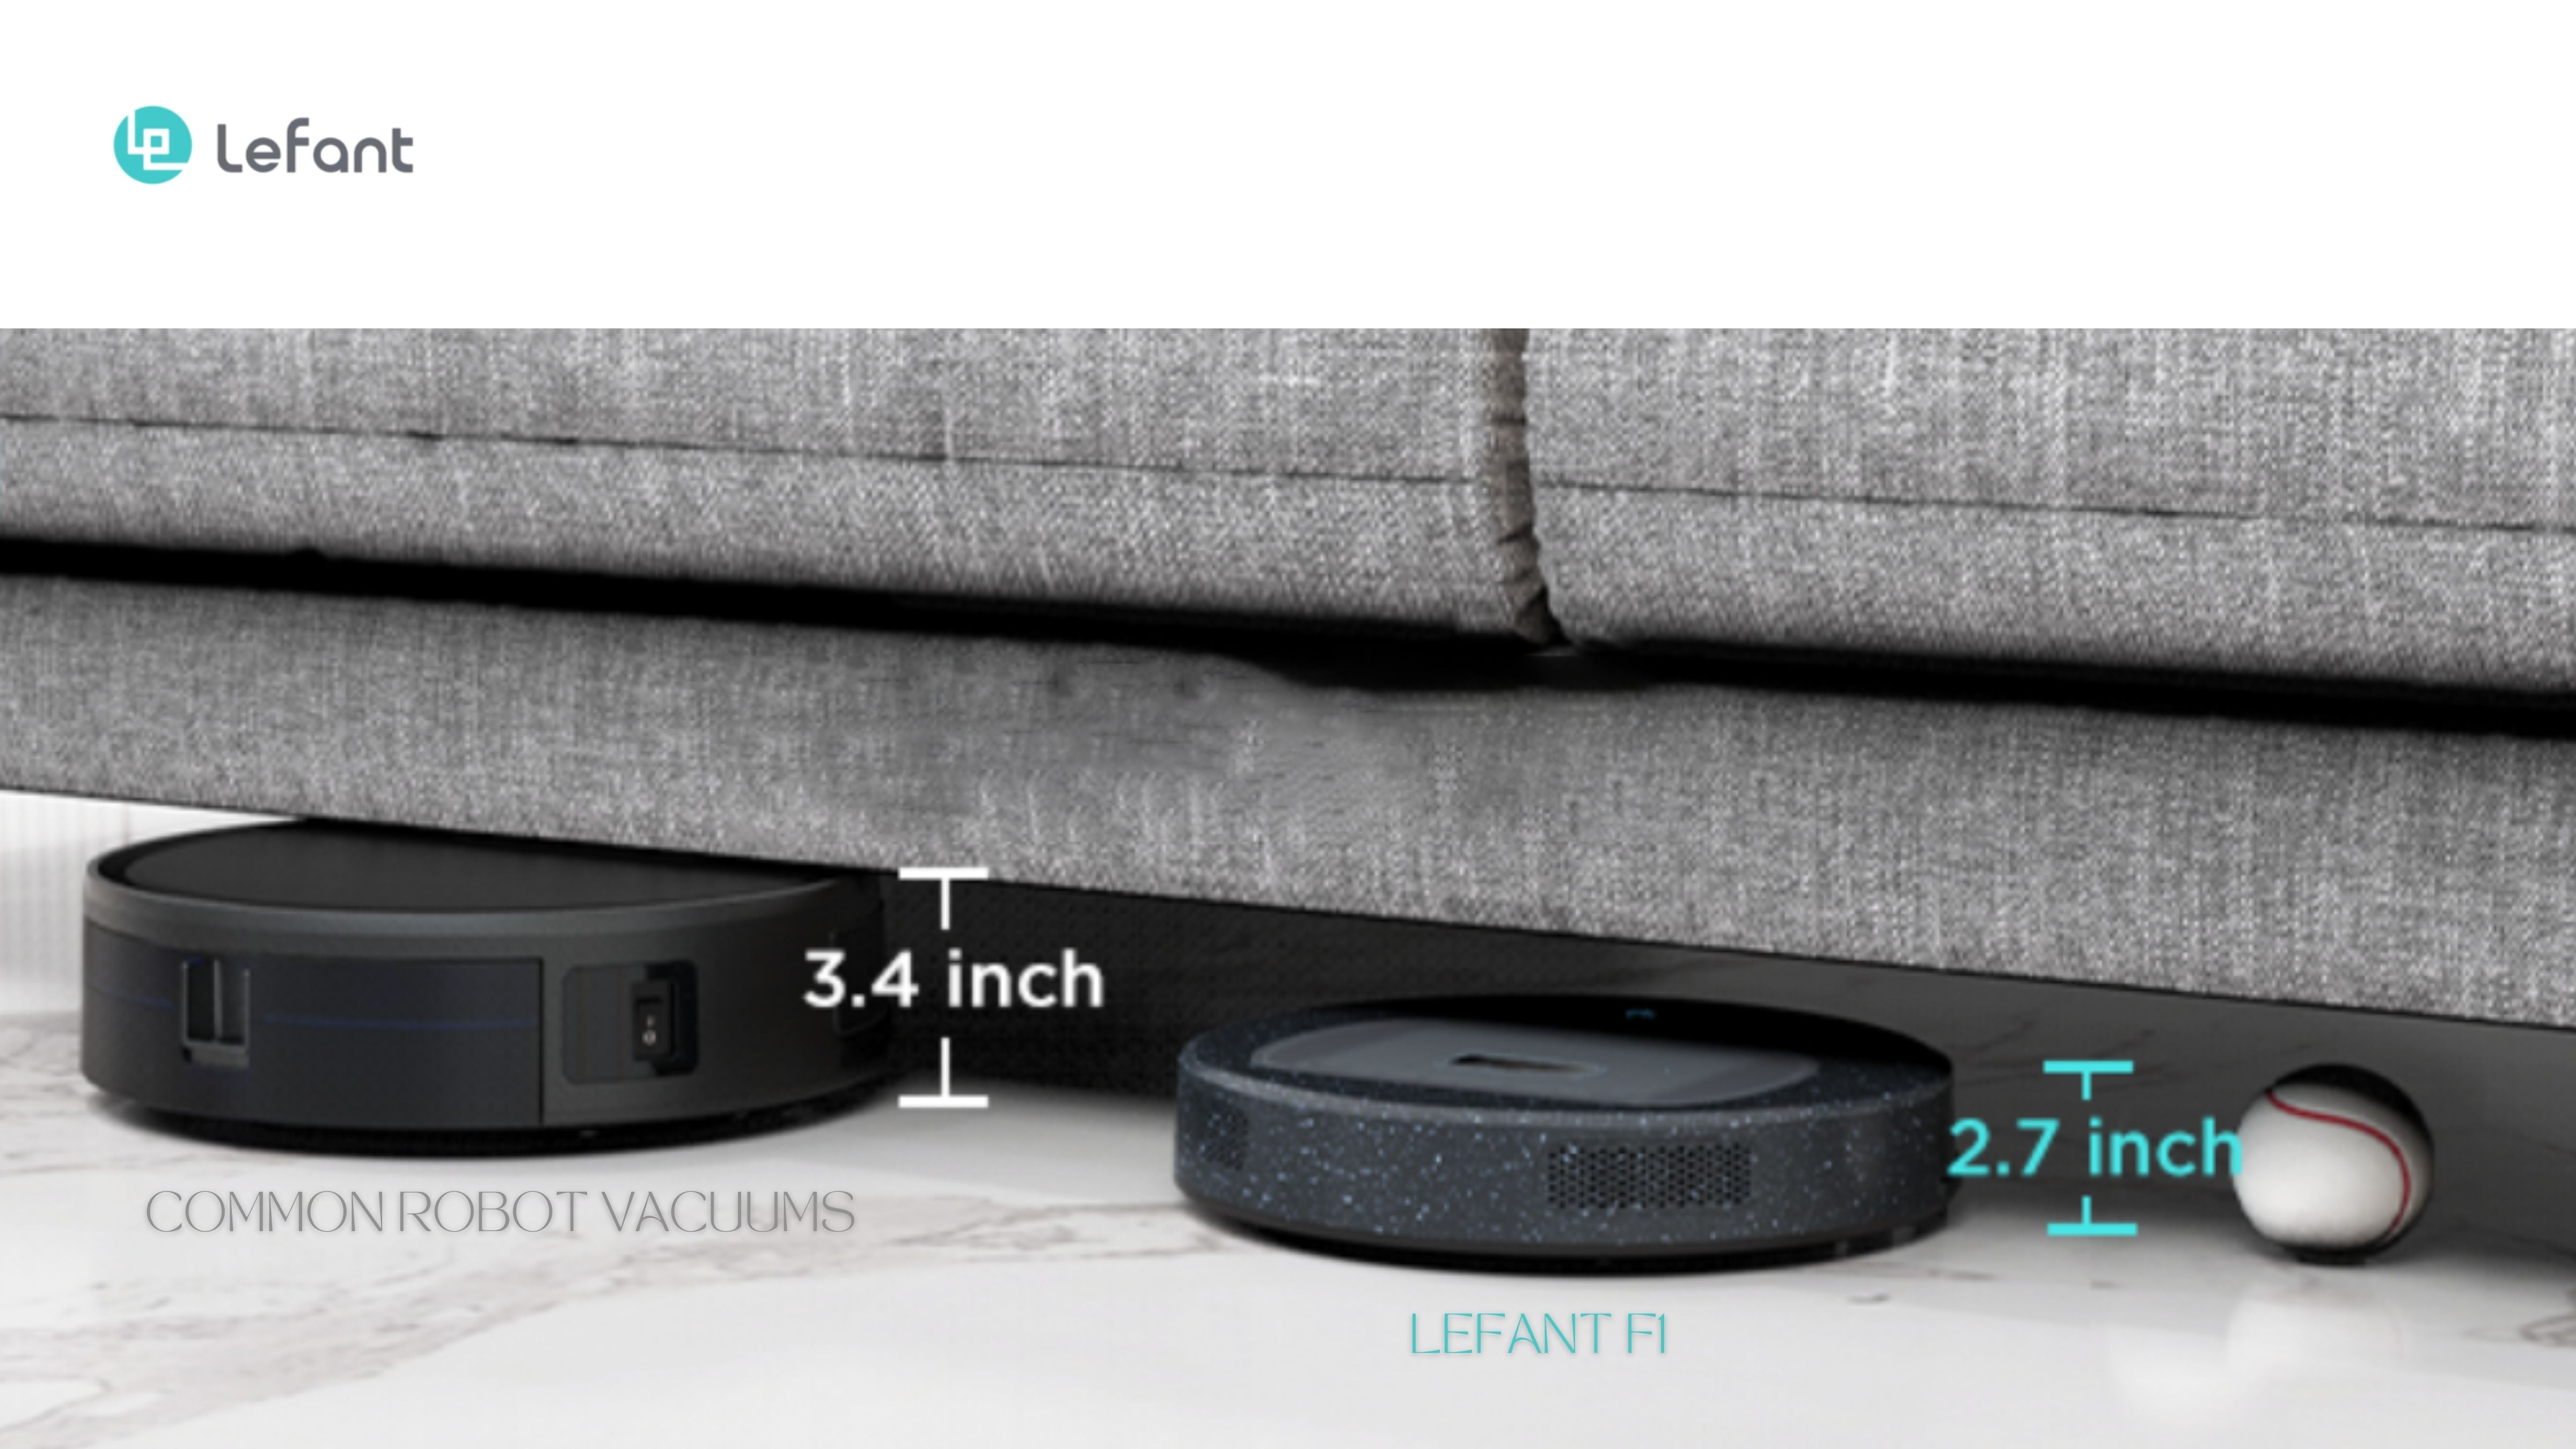 Lefant F1 - An ultra compact, yet powerful smart vacuum cleaner